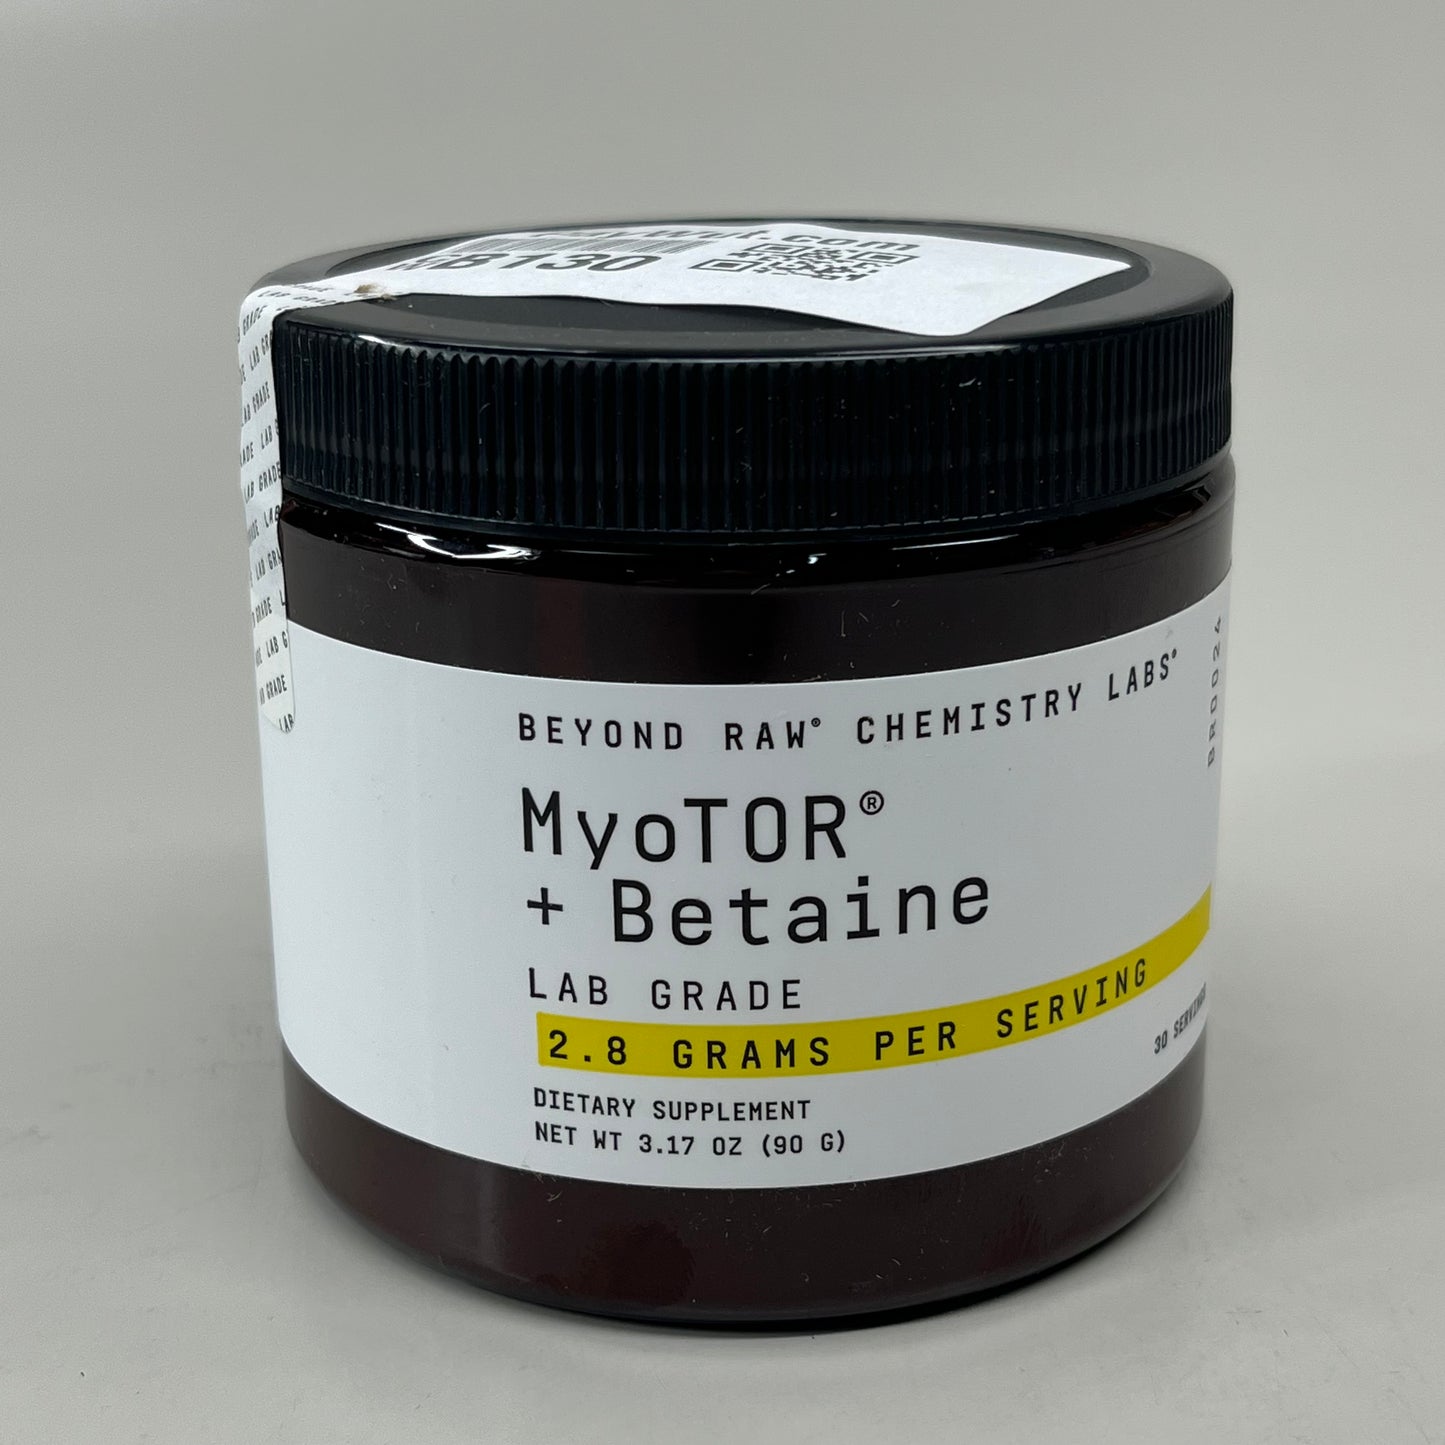 BEYOND RAW Chemistry Labs MyoTOR & Betaine Lab Grade 3.17 oz. 90g 364420 Exp: 10/24 (New)